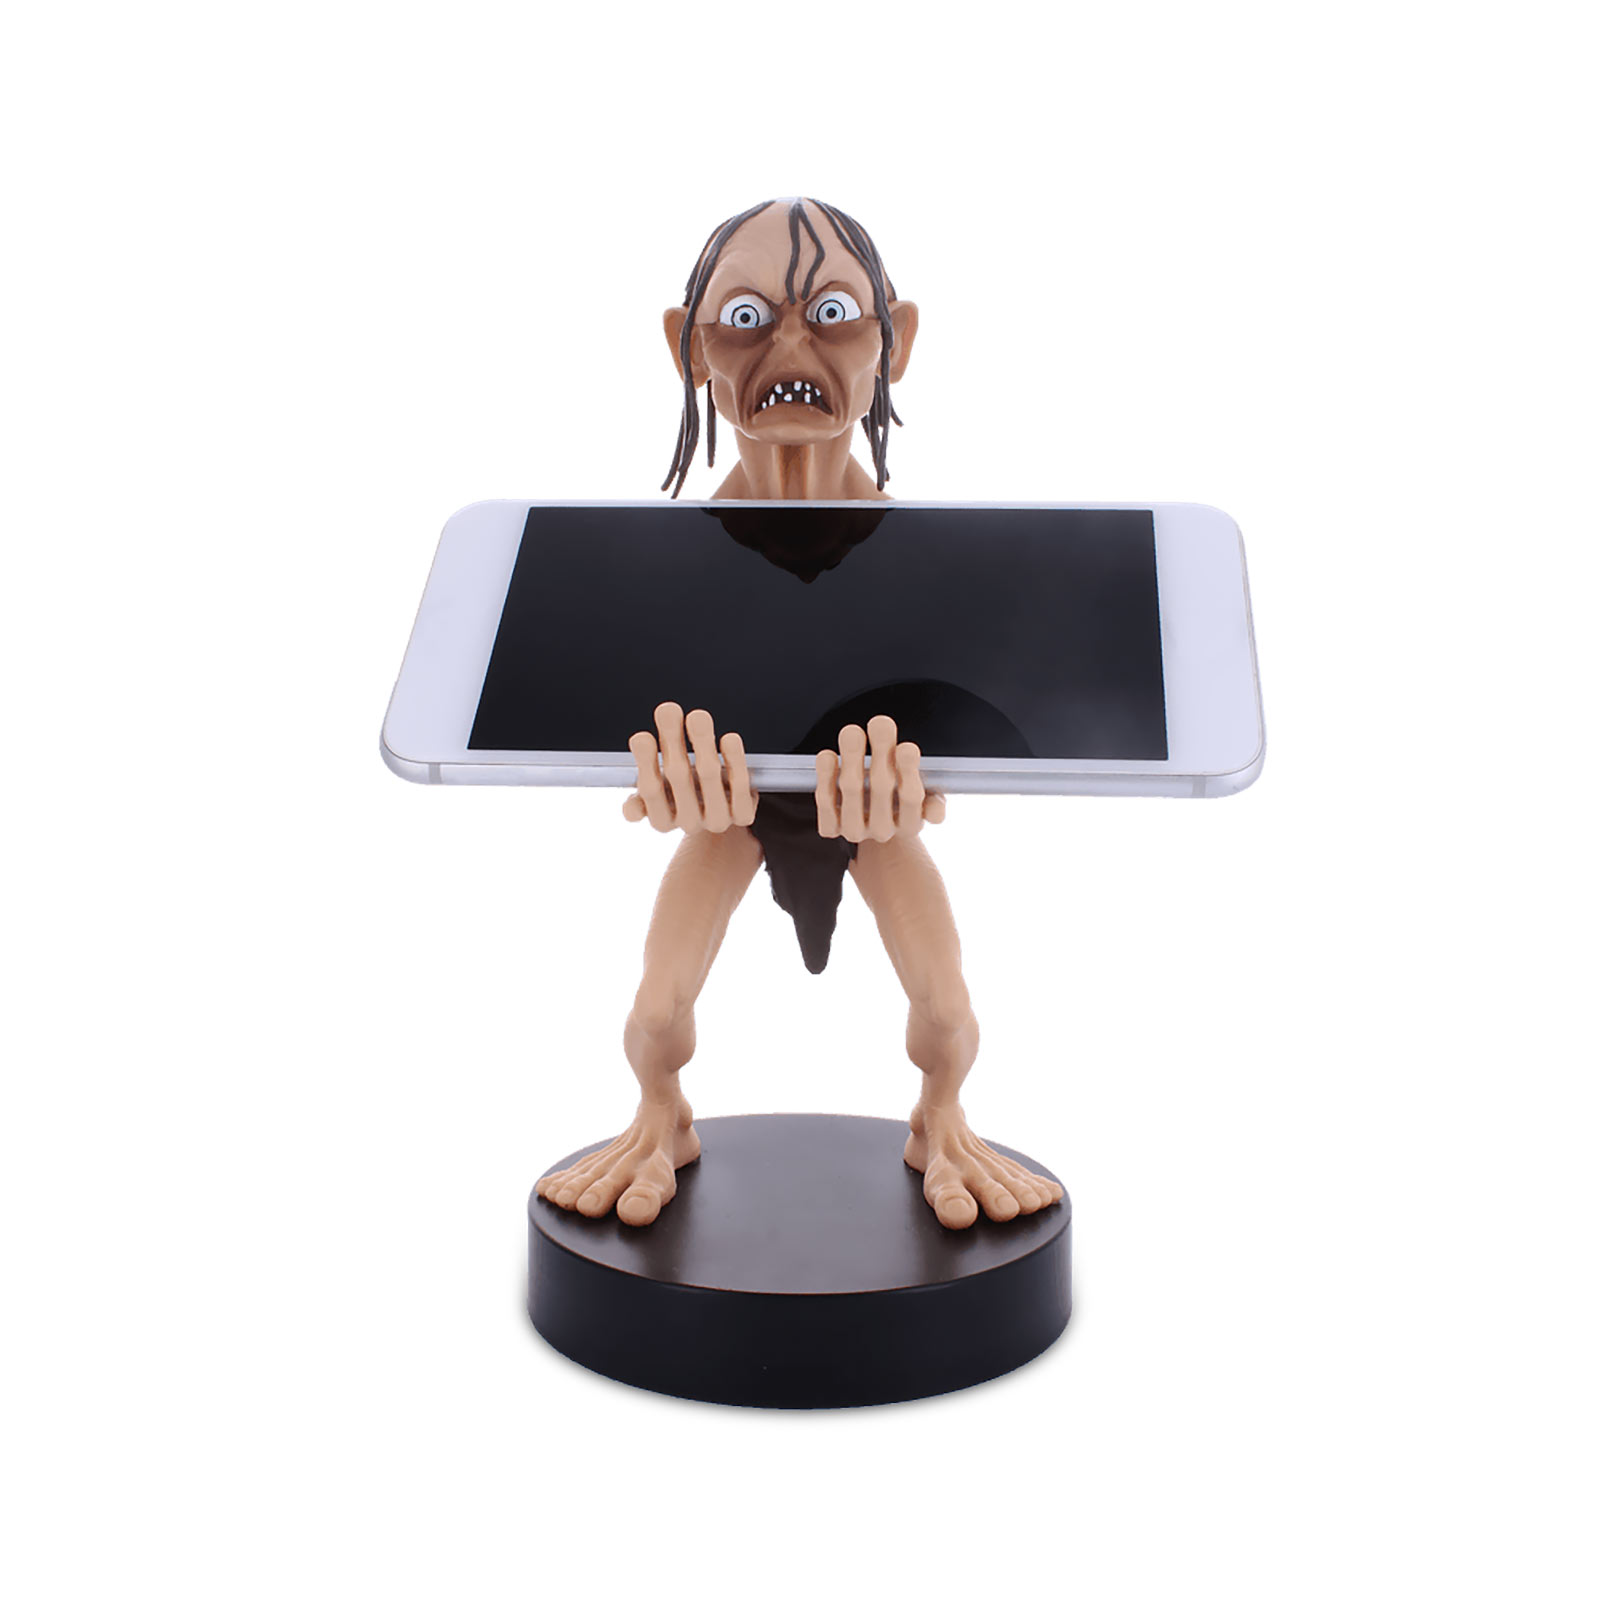 Lord of the Rings - Gollum Cable Guy Figure